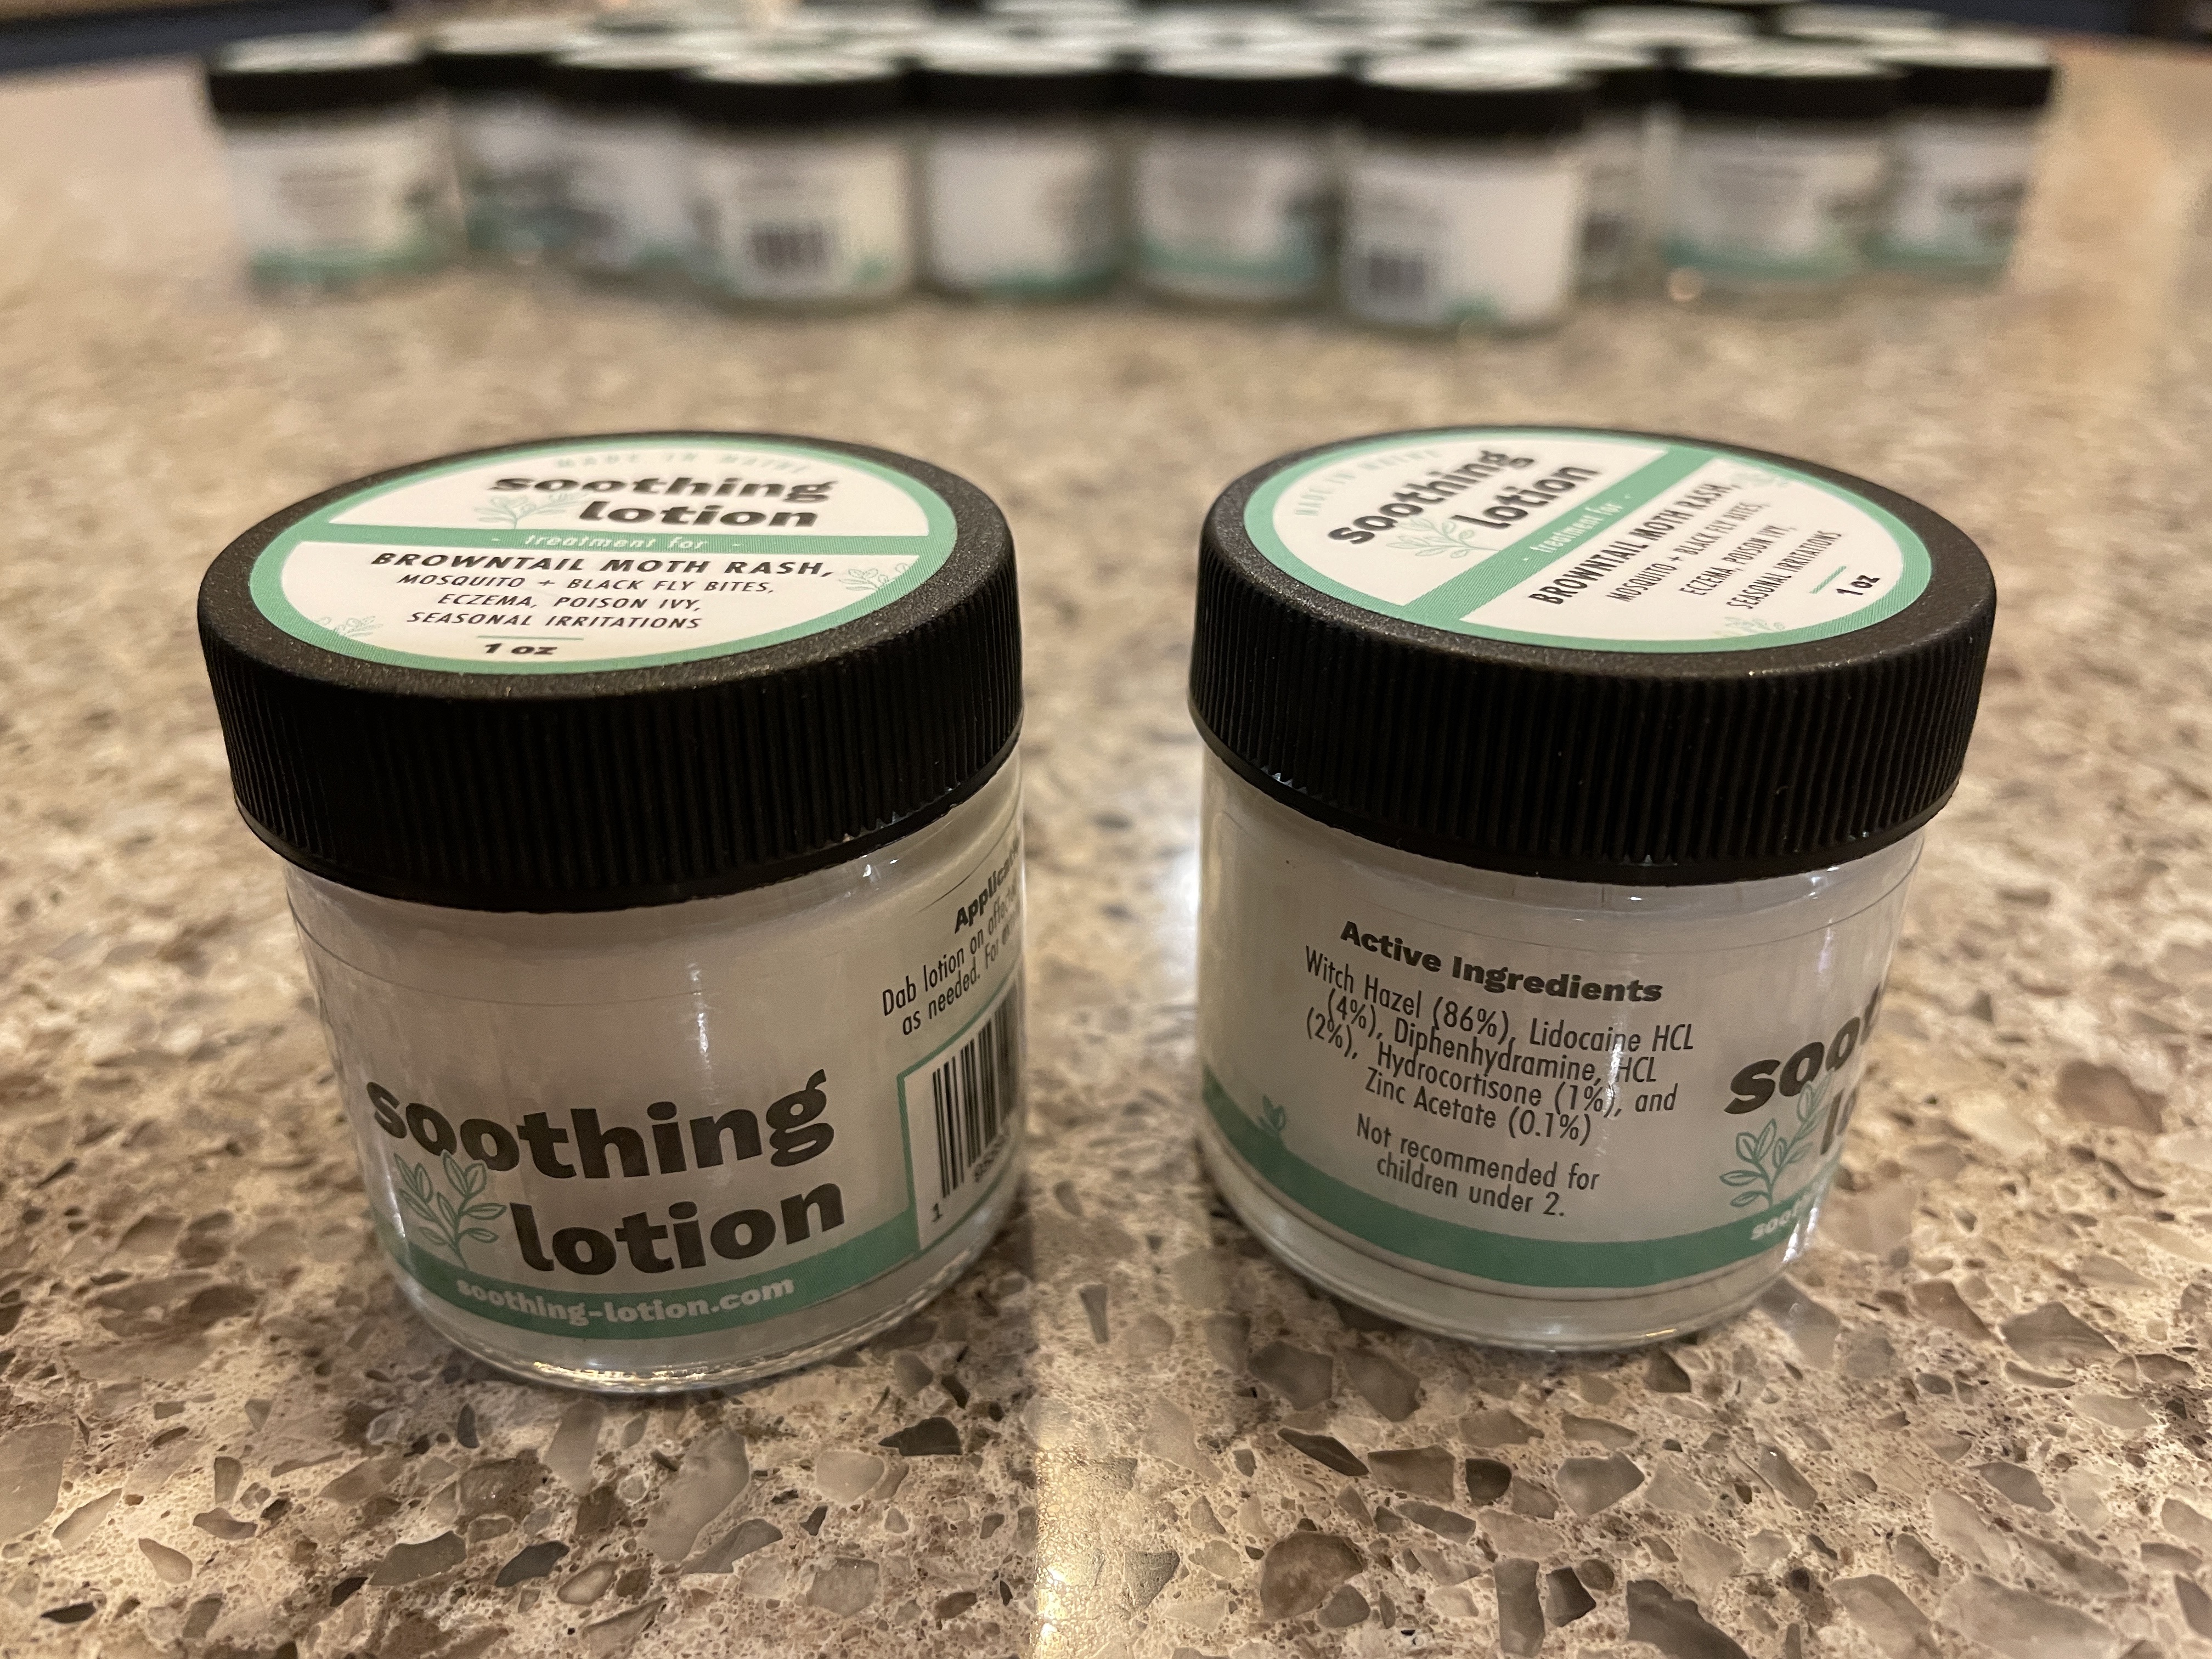 https://soothinglotion.files.wordpress.com/2022/03/soothinglotion_new.jpeg